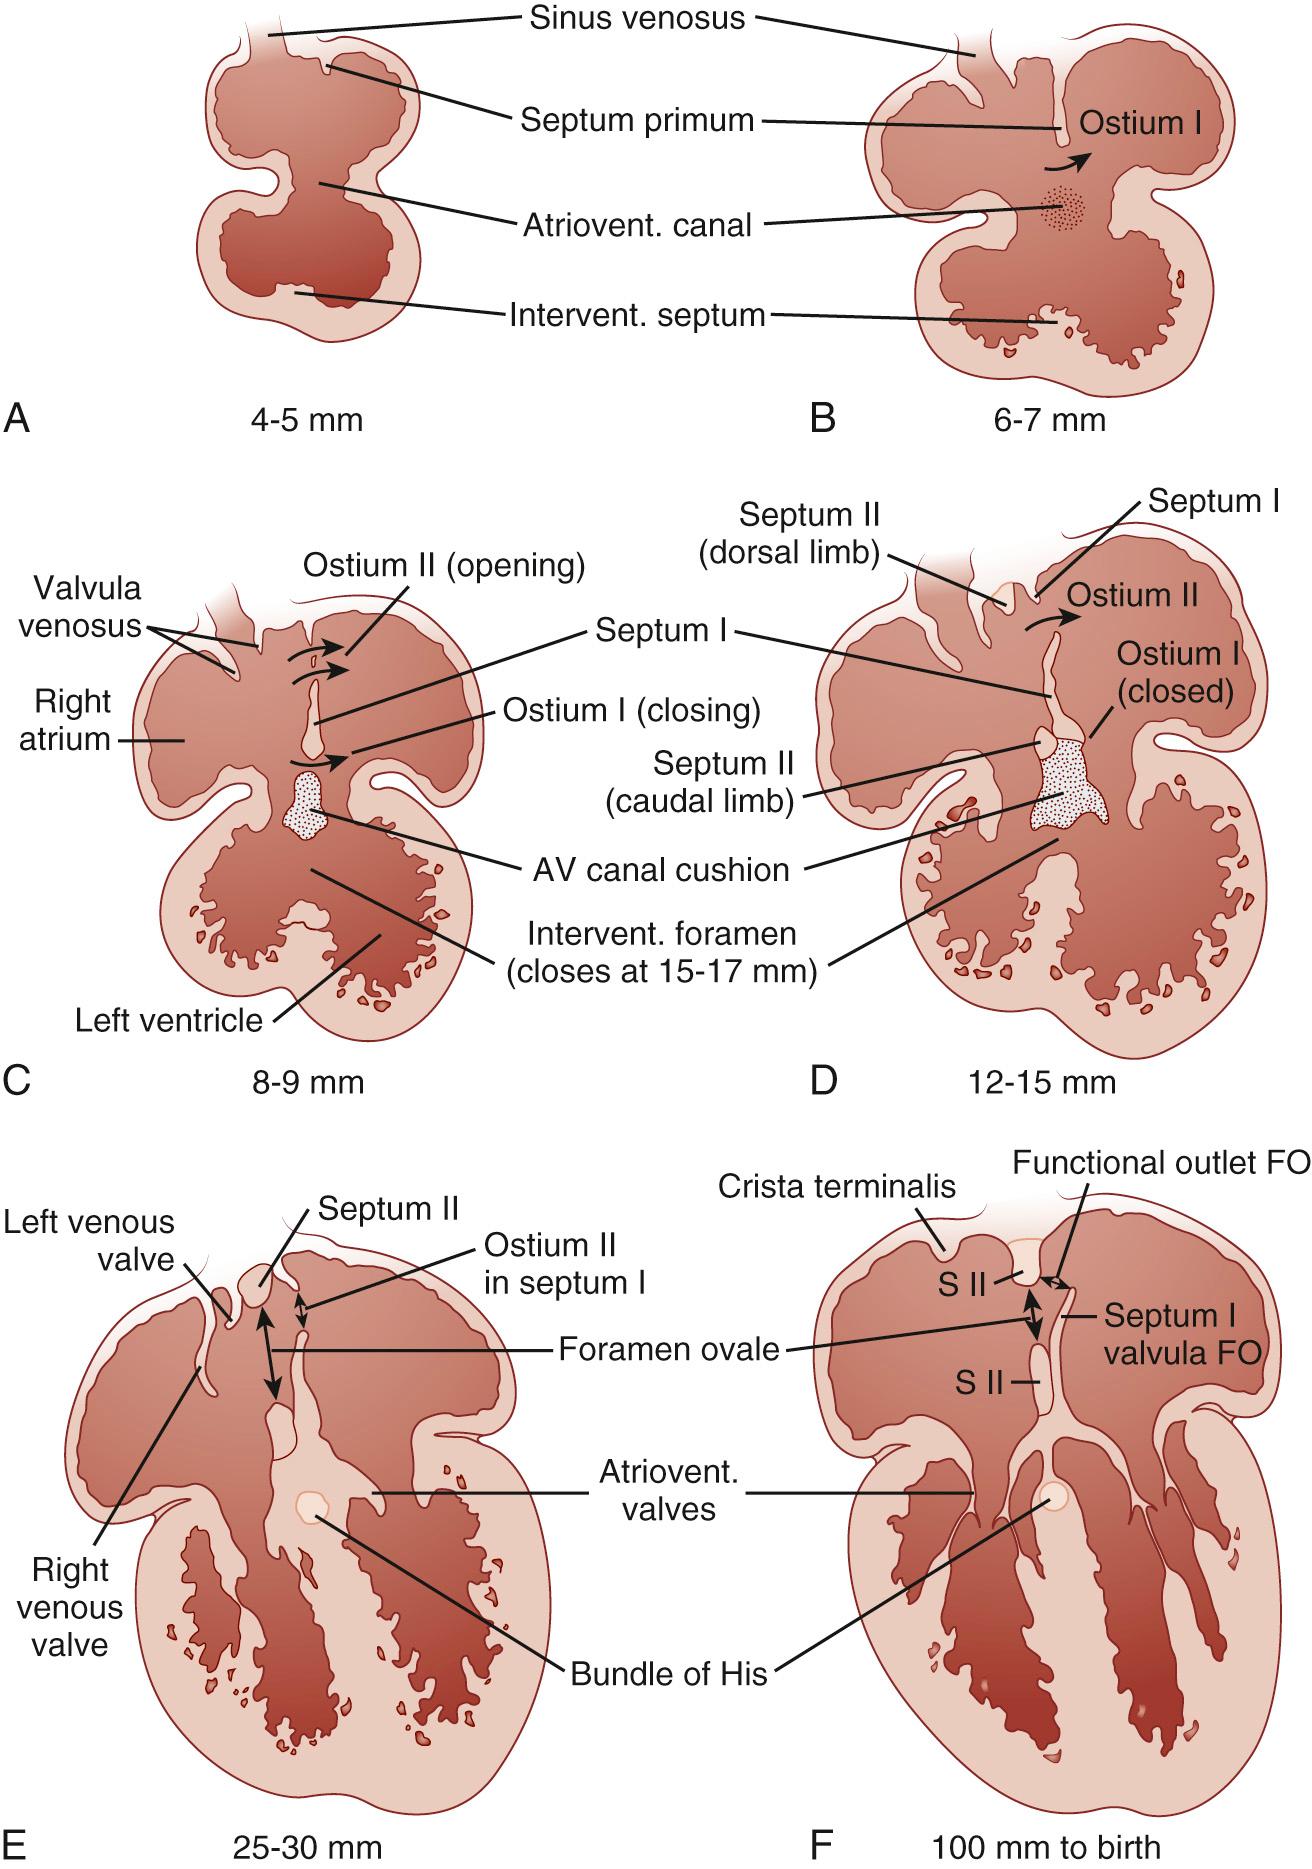 FIGURE 114-2, Four-chamber sectional diagrams of the fetal heart with particular attention to the morphology of the forming interatrial septum and the foramen ovale. A, The early stages in the formation of the septum primum, from the superior aspect of the common atrium. B, As the septum primum grows toward the endocardial cushion, the ostium primum is defined. C, As the ostium primum closes, the ostium secundum forms by the resorption of the cephalad portions of the septum primum. D, The septum secundum begins to form rightward and parallel to the septum primum, obliterating the remaining ostium primum. E and F, The septum secundum circumscribes the foramen ovale, and the septum primum creates a flap valve permitting only right-to-left flow. AV, Atrioventricular; FO, foramen ovale.